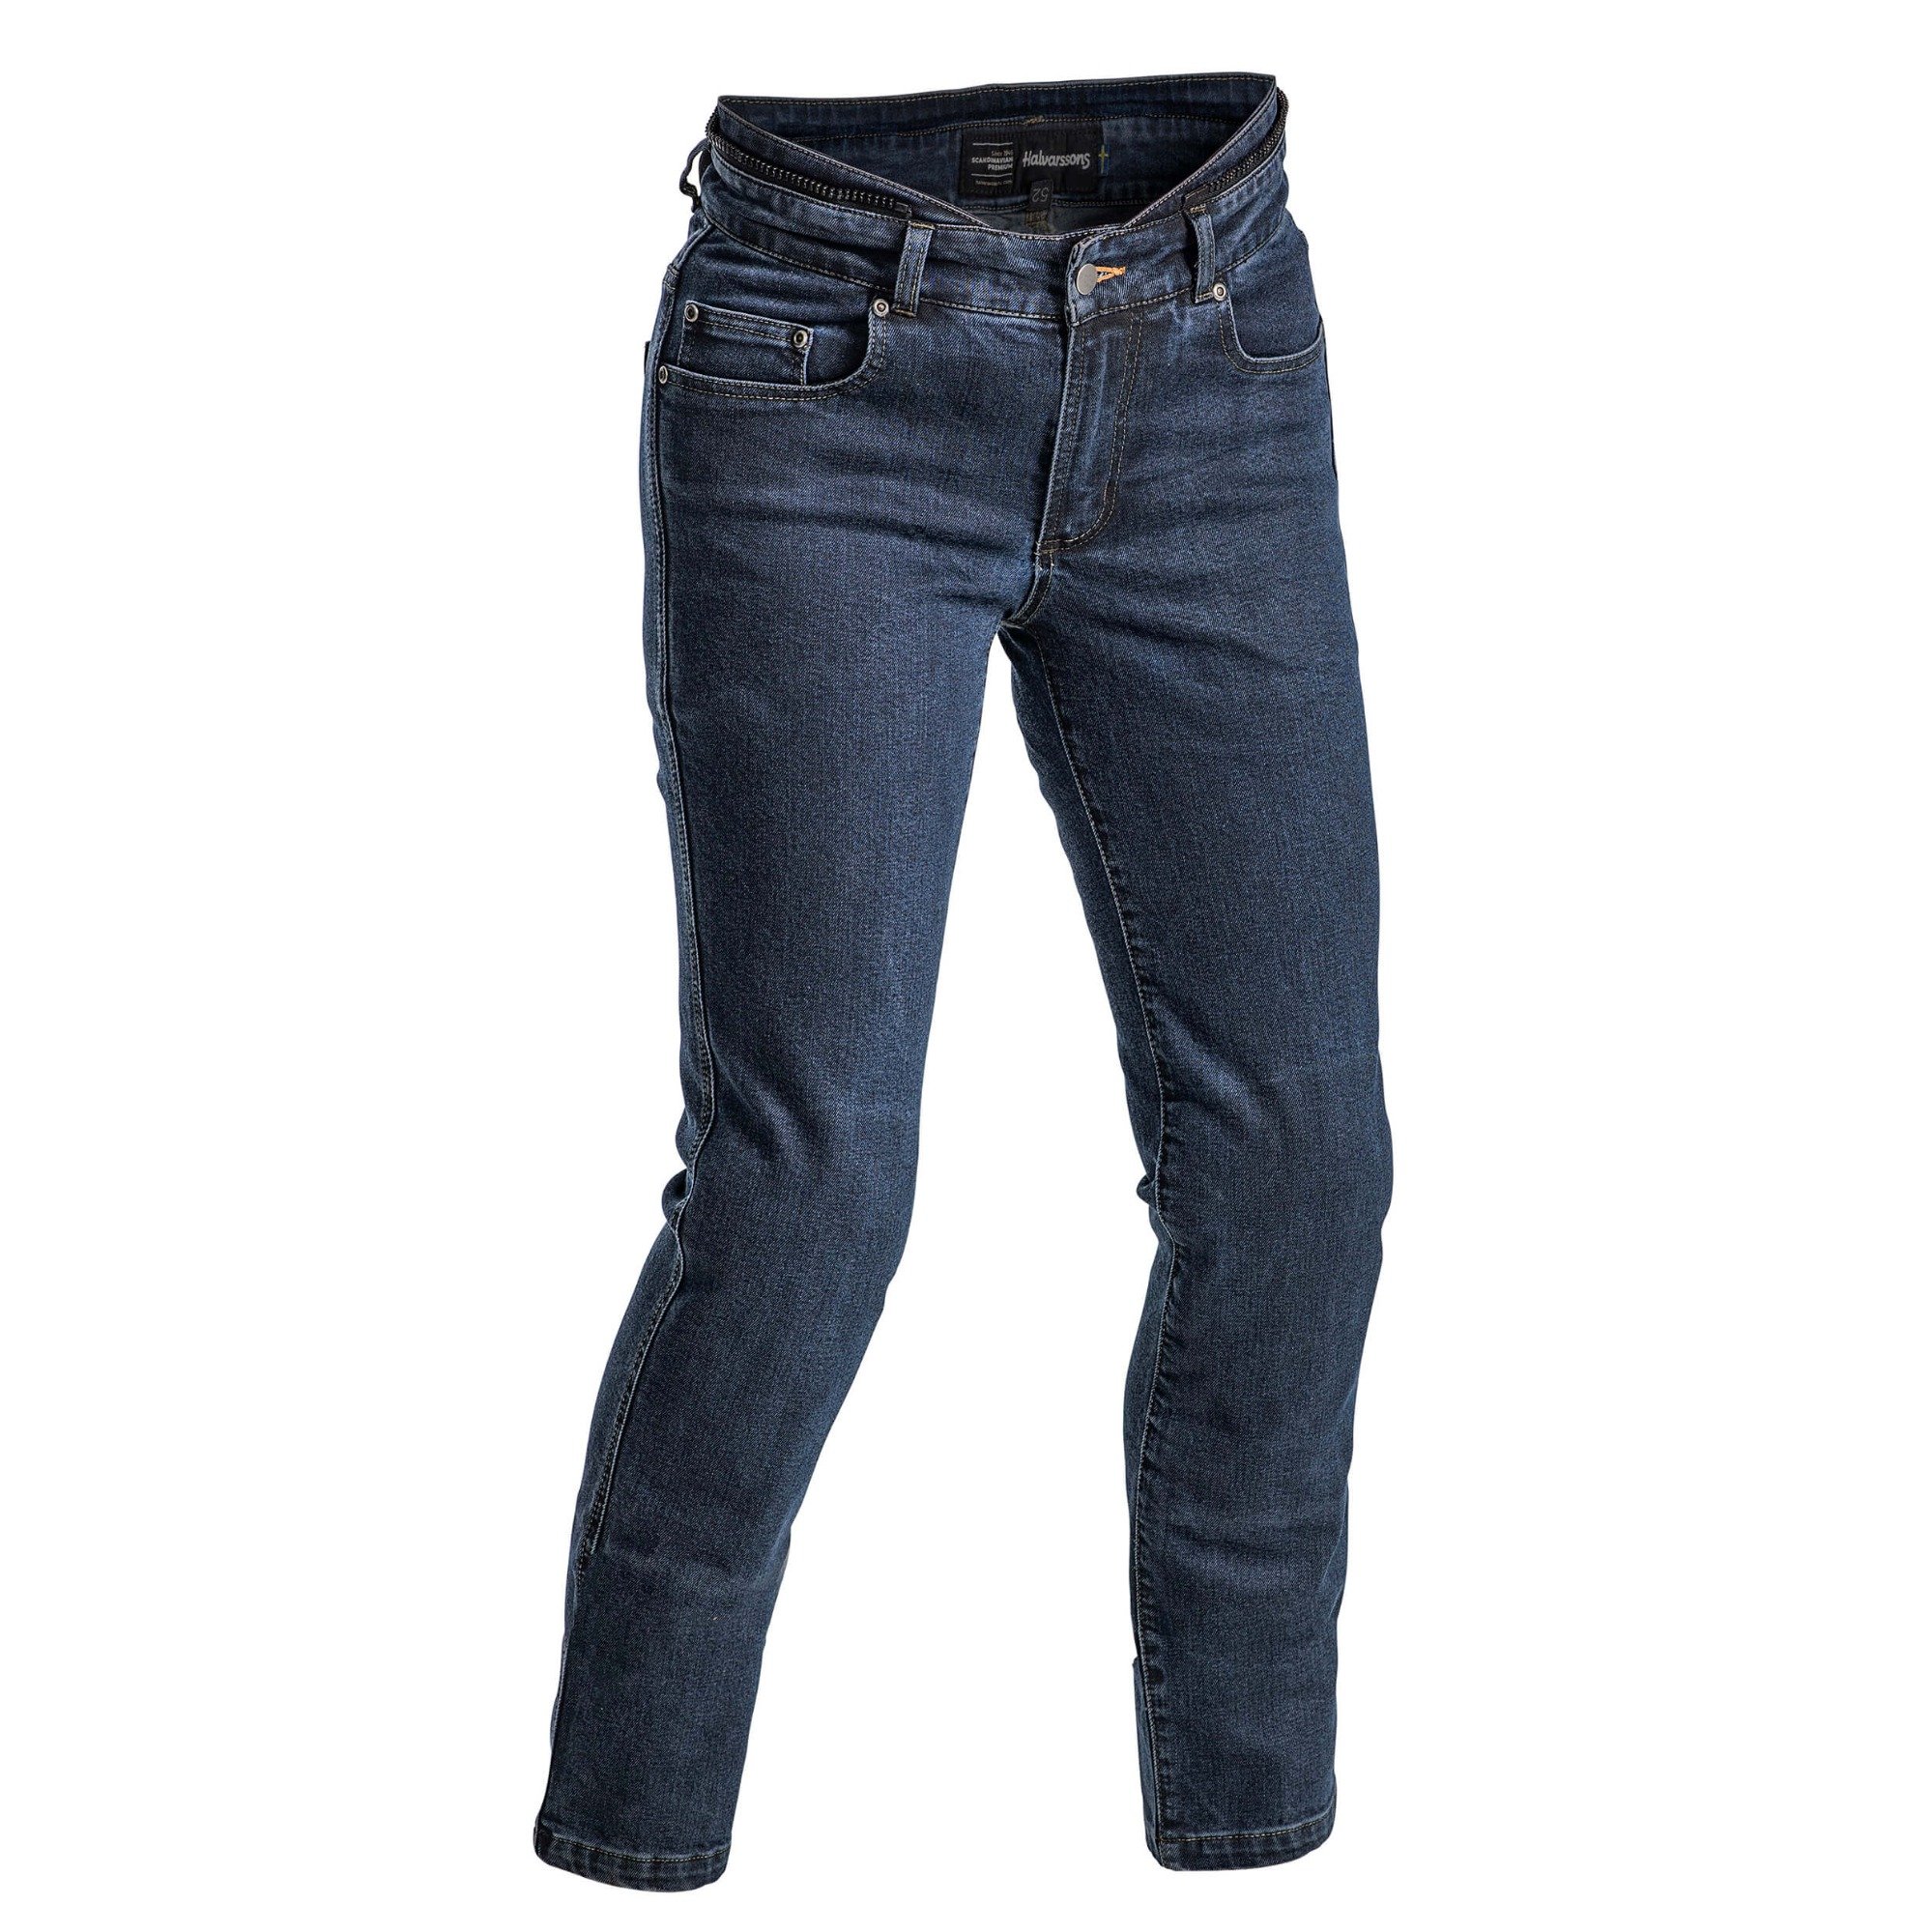 Image of Halvarssons Jeans Rogen Woman Blue Size 34 ID 6438235239089